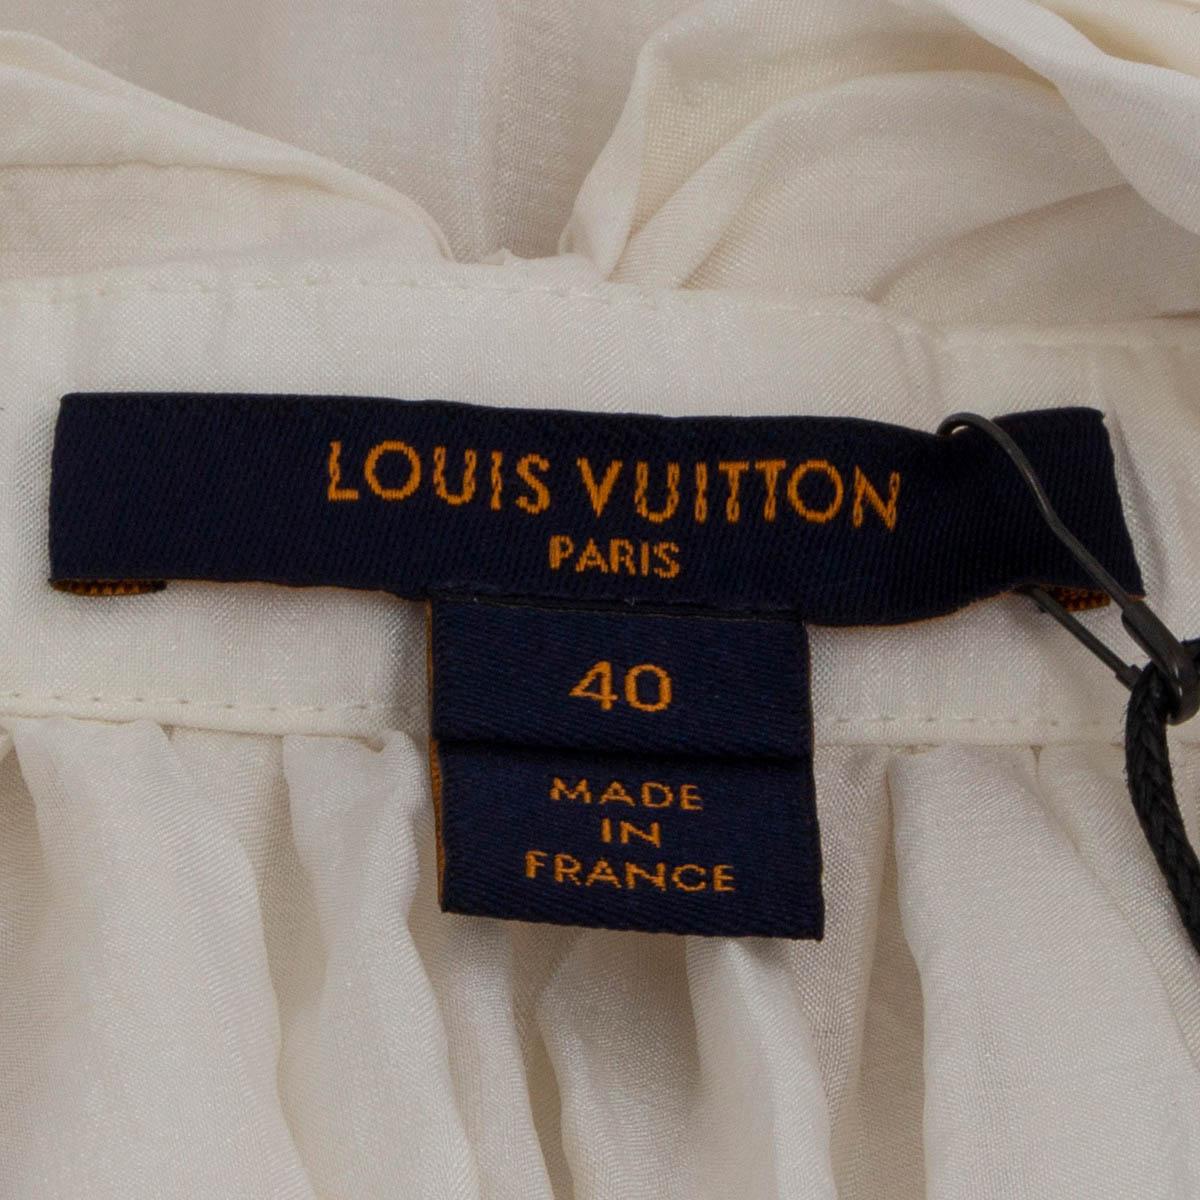 LOUIS VUITTON off-white silk SEMI SHEER RUFFLED PUSSY BOW Blouse Shirt 40 M In Excellent Condition For Sale In Zürich, CH